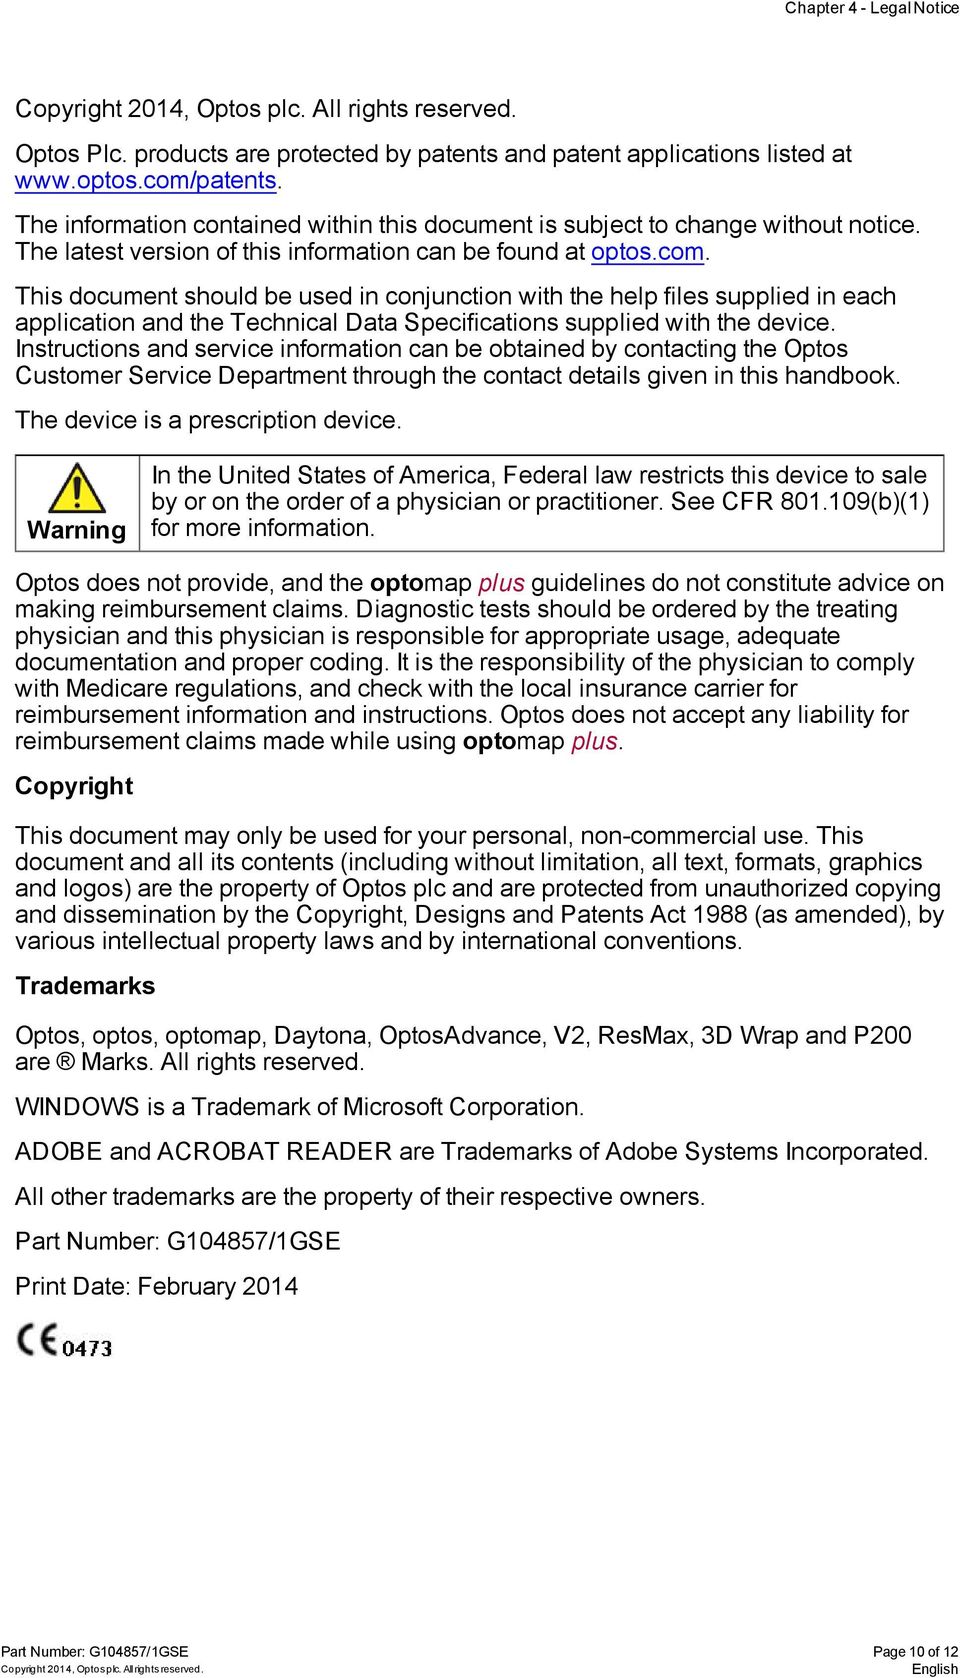 This document should be used in conjunction with the help files supplied in each application and the Technical Data Specifications supplied with the device.